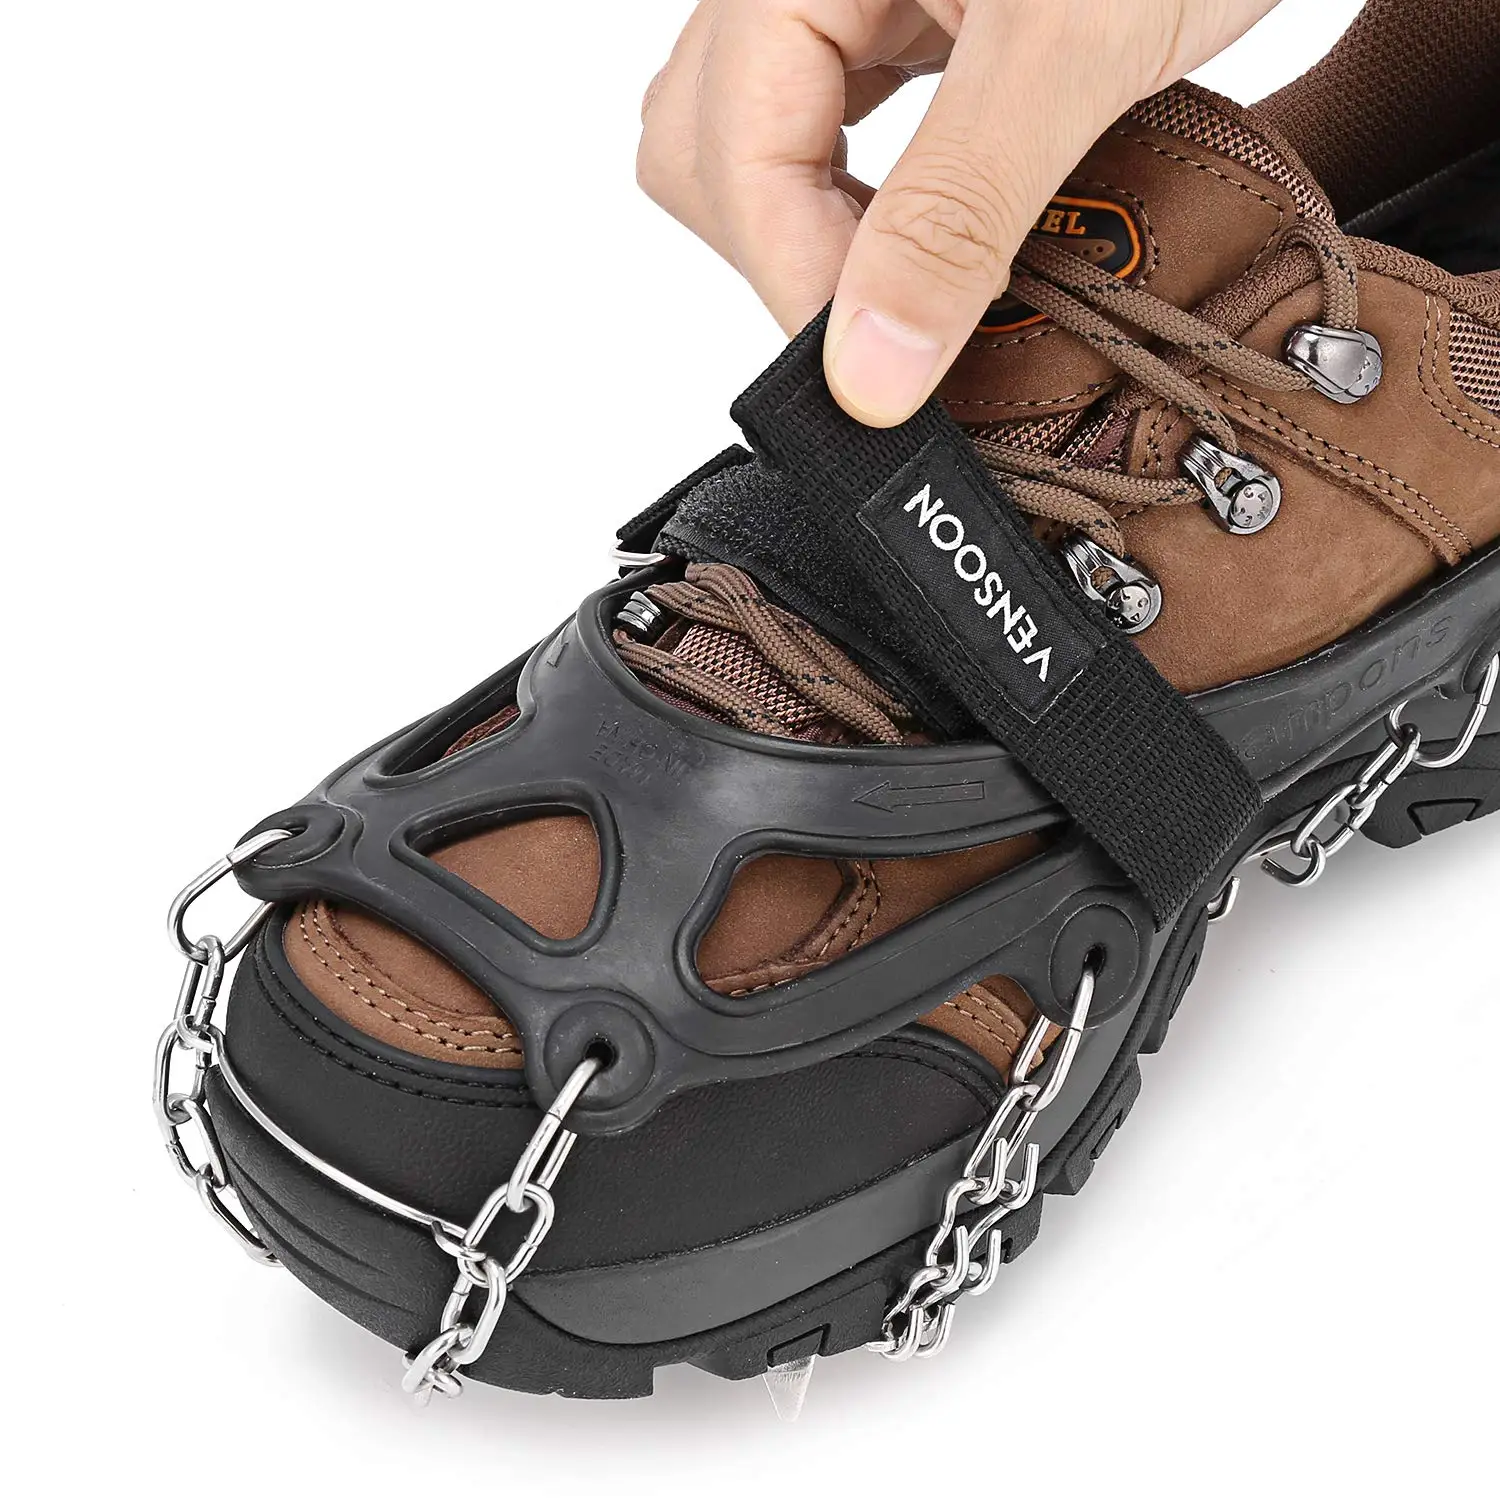 Ice Grips EONPOW Ice & Snow Grips Cleat Over Shoe/Boot Traction Cleat Rubber Spikes Anti Slip Slip-on Stretch Footwear 